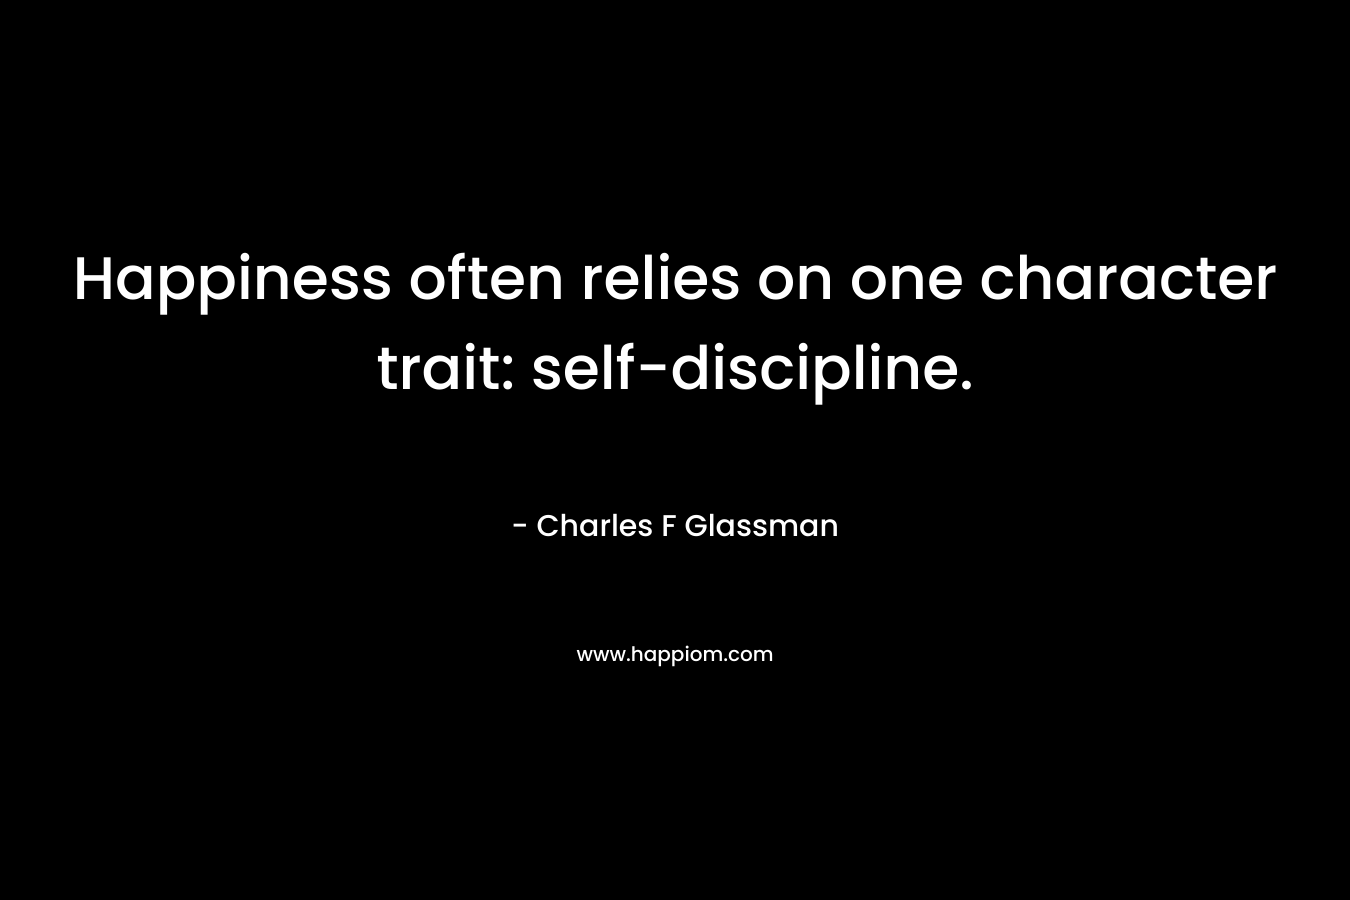 Happiness often relies on one character trait: self-discipline.